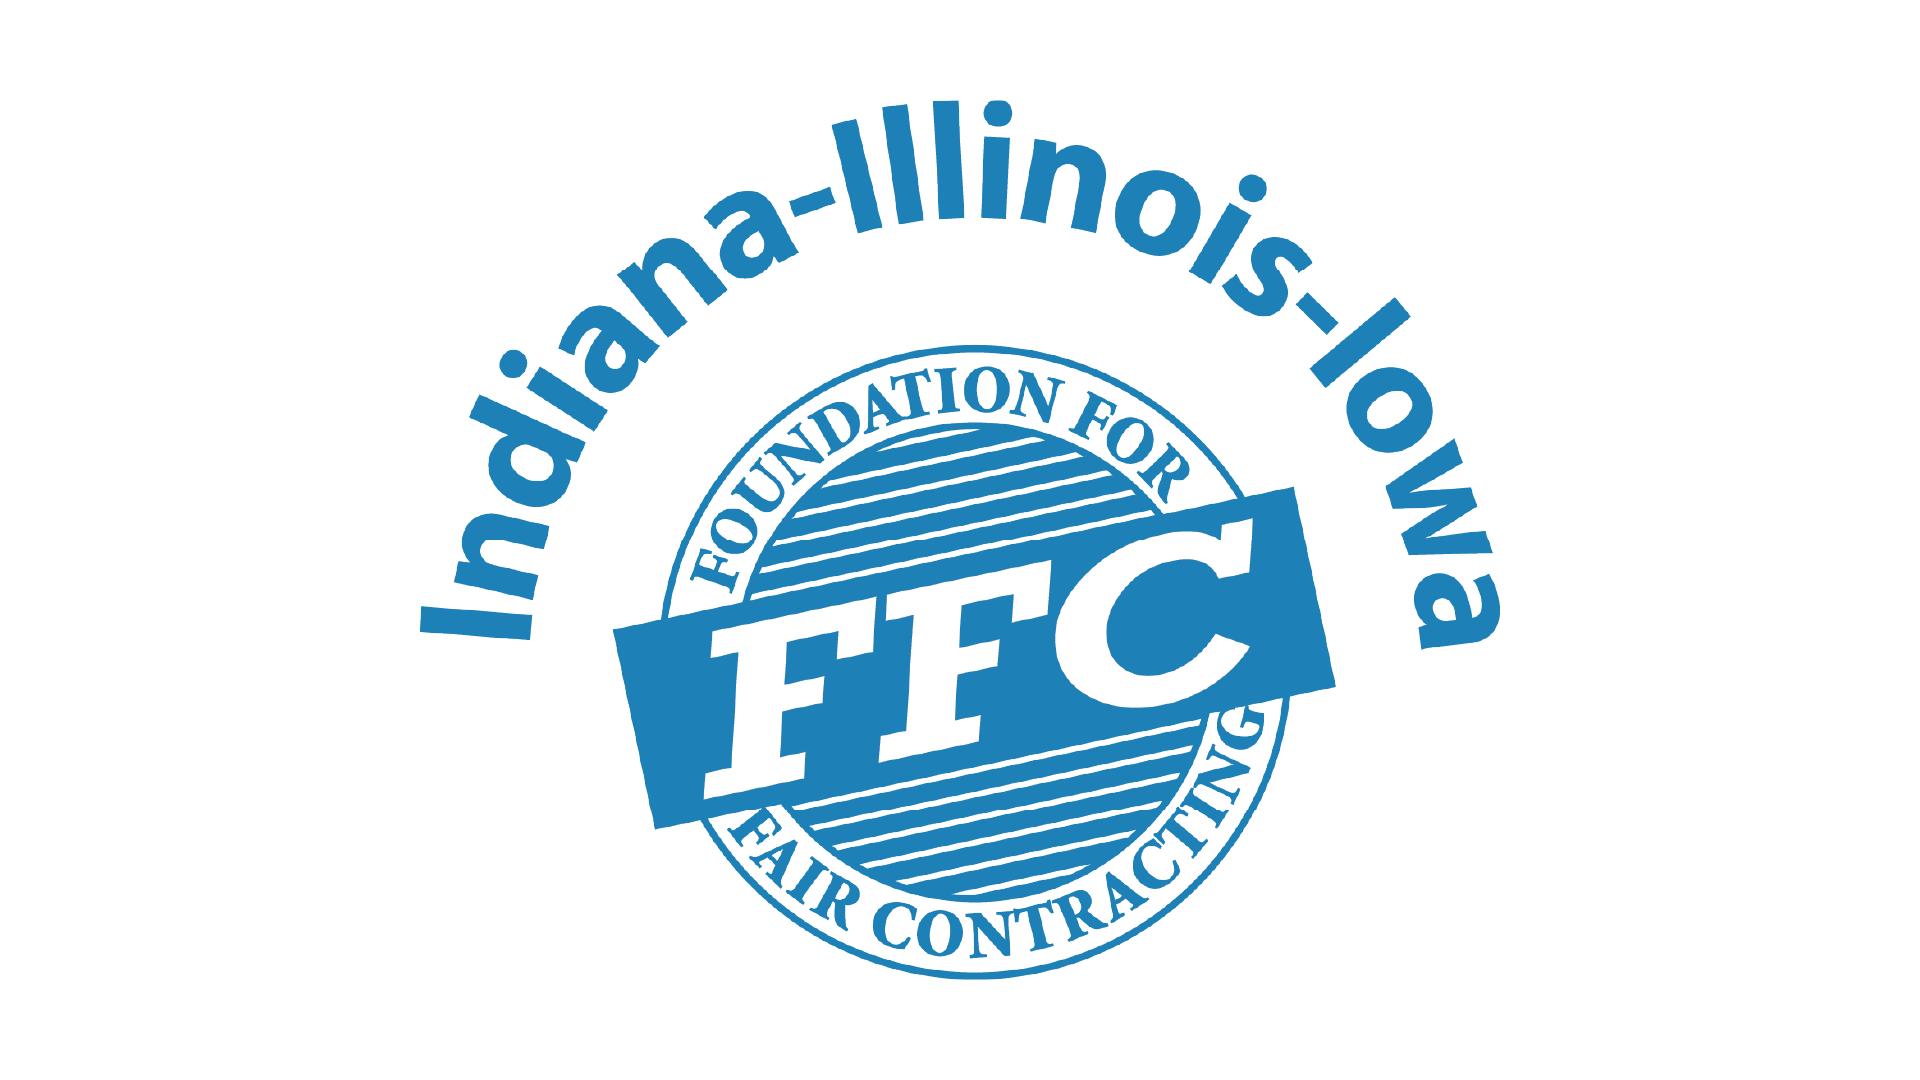 The Indiana, Illinois, Iowa Foundation for Fair Contracting